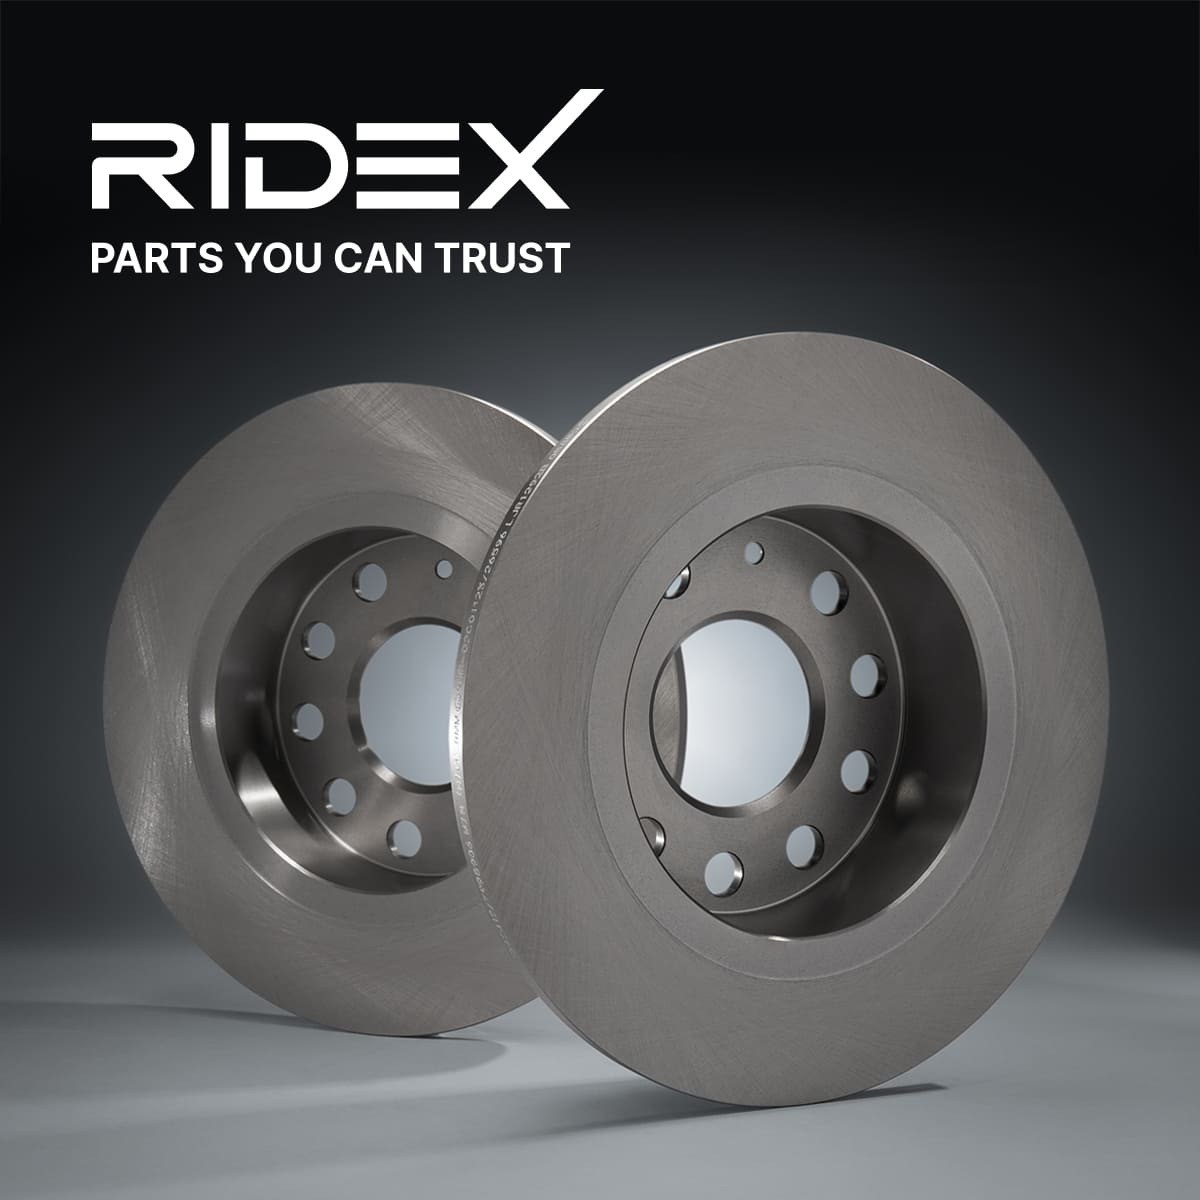 82B0251 Brake discs 82B0251 RIDEX Front Axle, 300,0x28mm, 05/07x114,3, internally vented, Uncoated